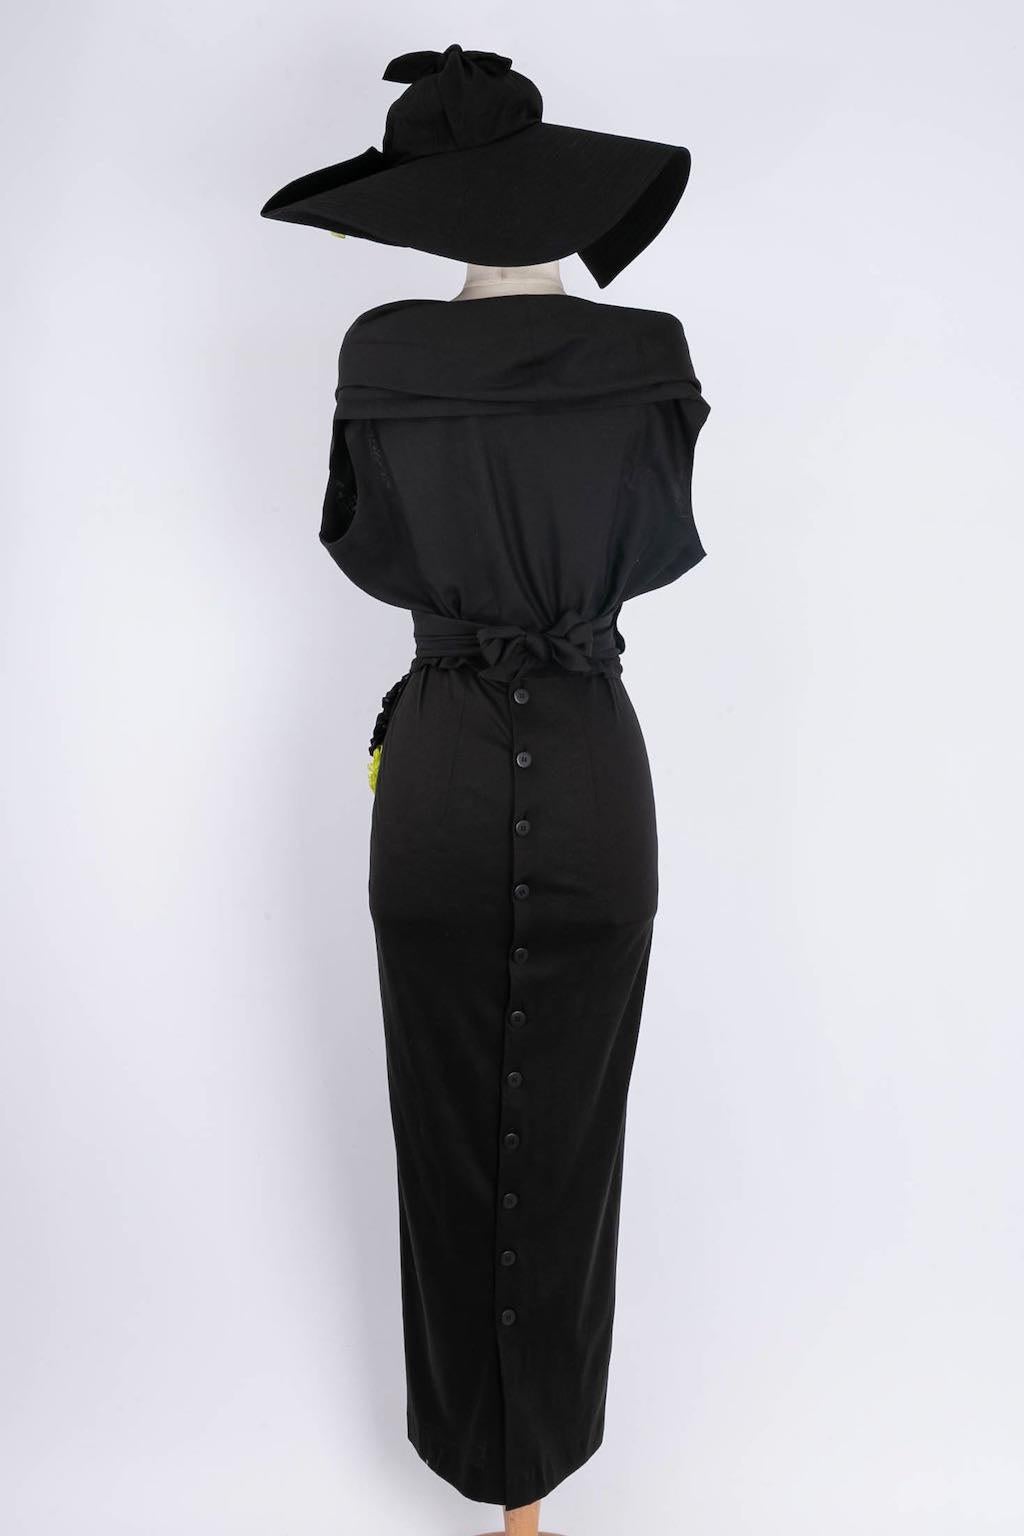 Black Chantal Thomass Cotton Dress Embroidered with Flowers Spring Collection, 1988 For Sale